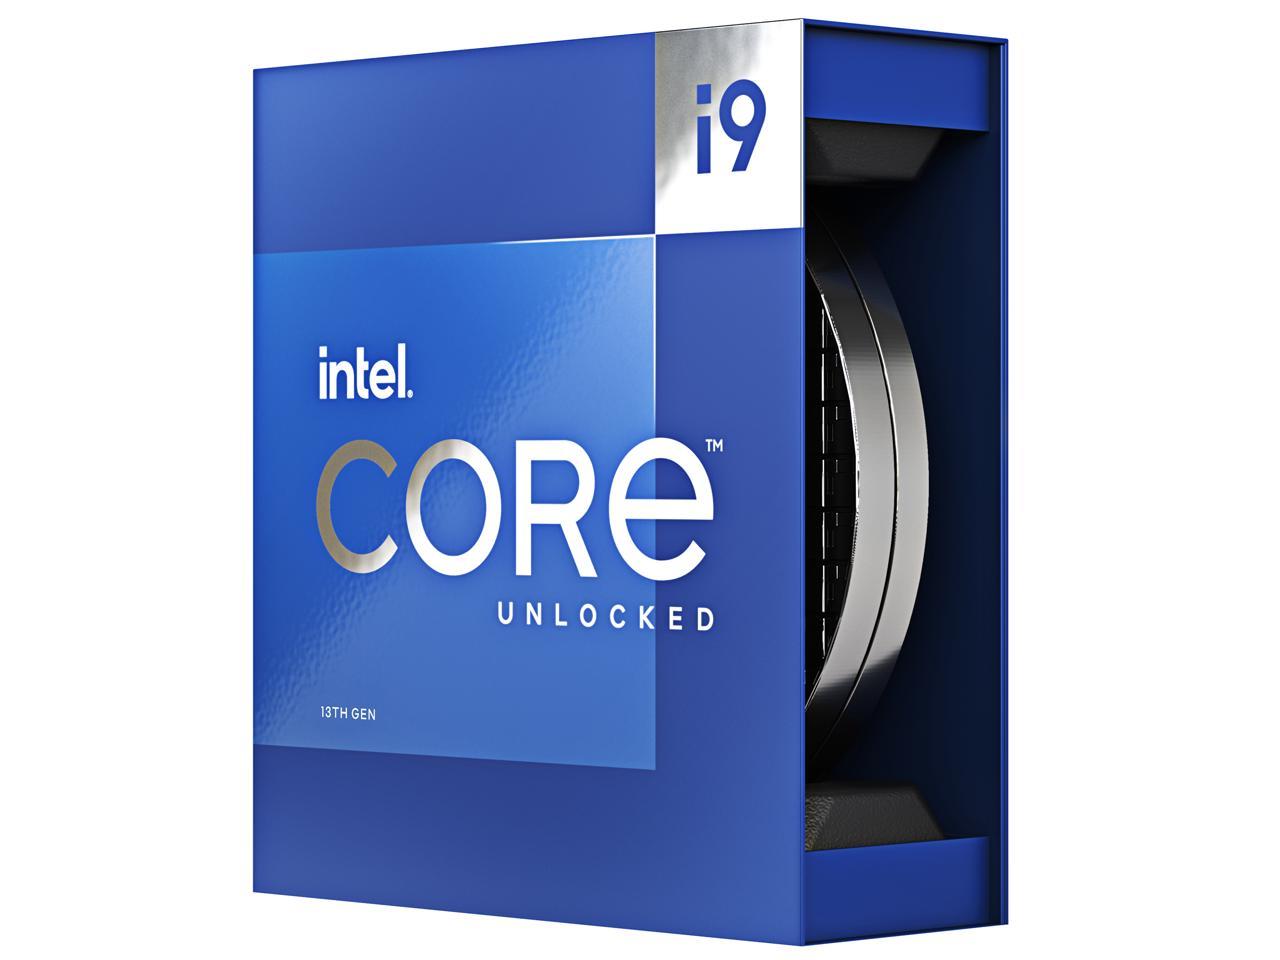  <B>Intel 13th Gen. LGA1700 CPU: Raptor Lake i9-13900KF</B><BR>24-Cores (8P-Cores/16E-Cores) 32-Threads, 5.8GHz (Turbo) 36MB Cache, 253W<BR>No Intergrated Graphics, No CPU Cooler Included  